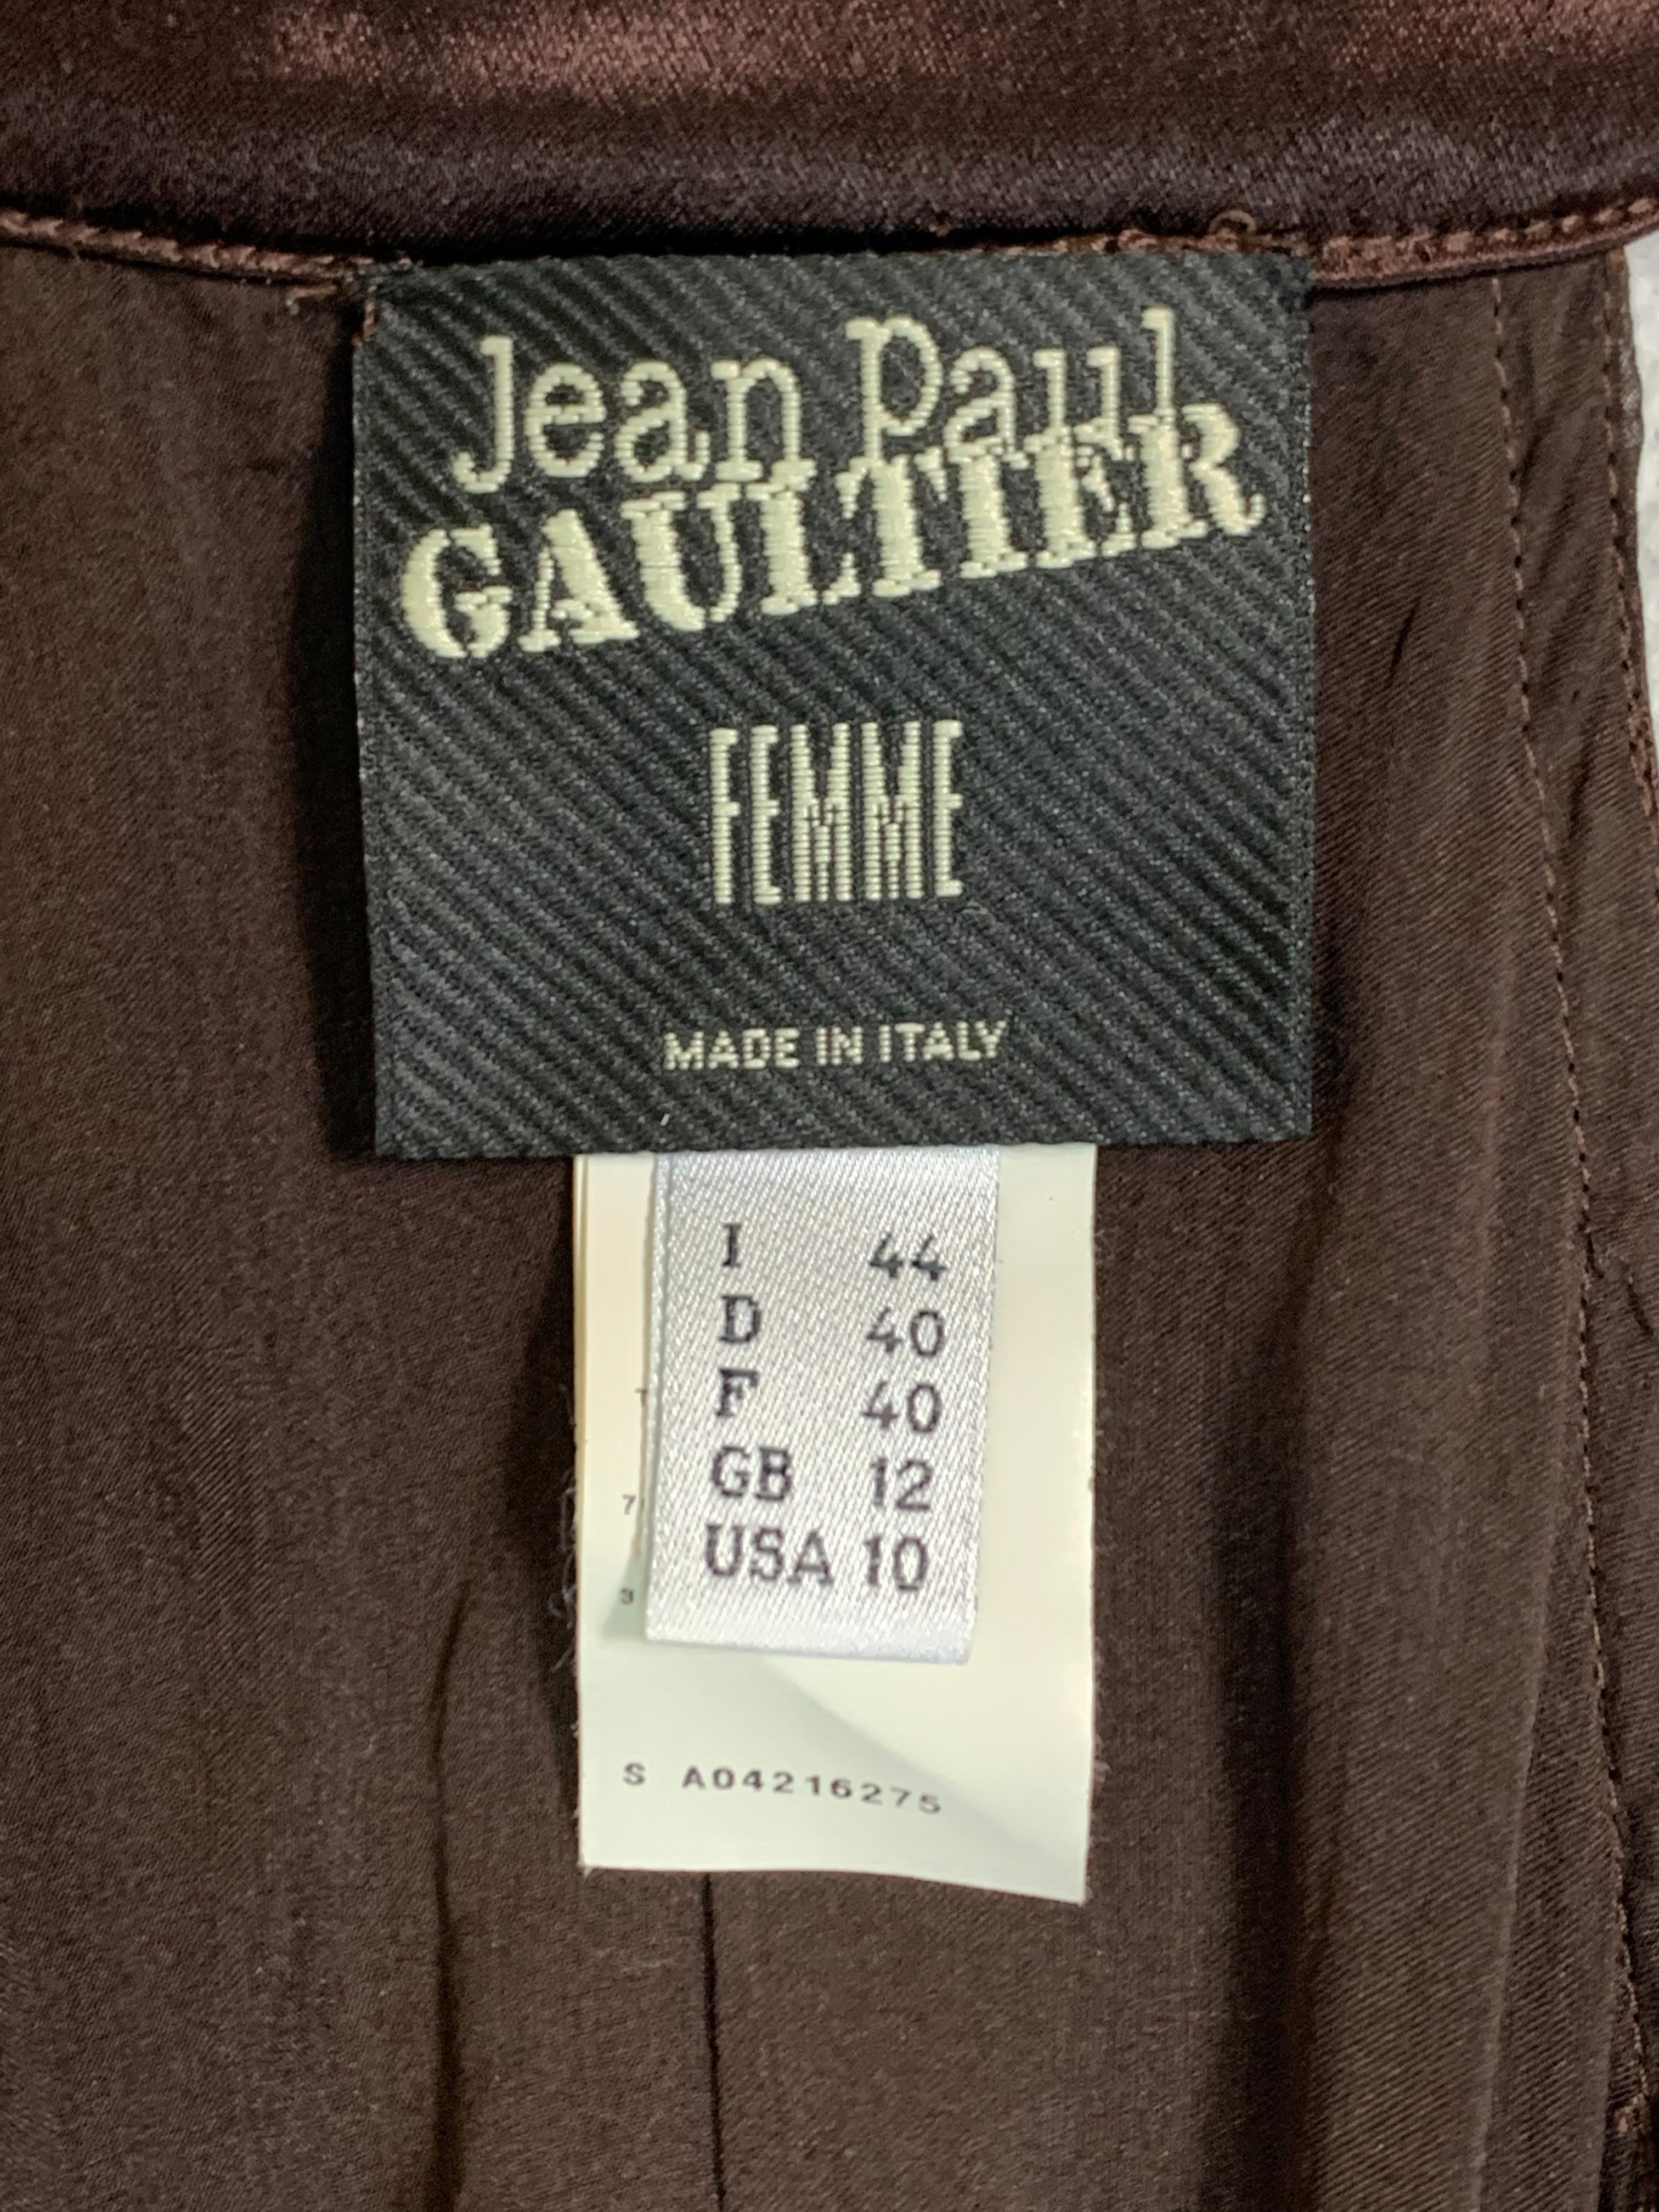 F/W 2008 Jean Paul Gaultier Runway Brown Satin Plunging Cut-Out Gown Dress In Good Condition For Sale In Yukon, OK